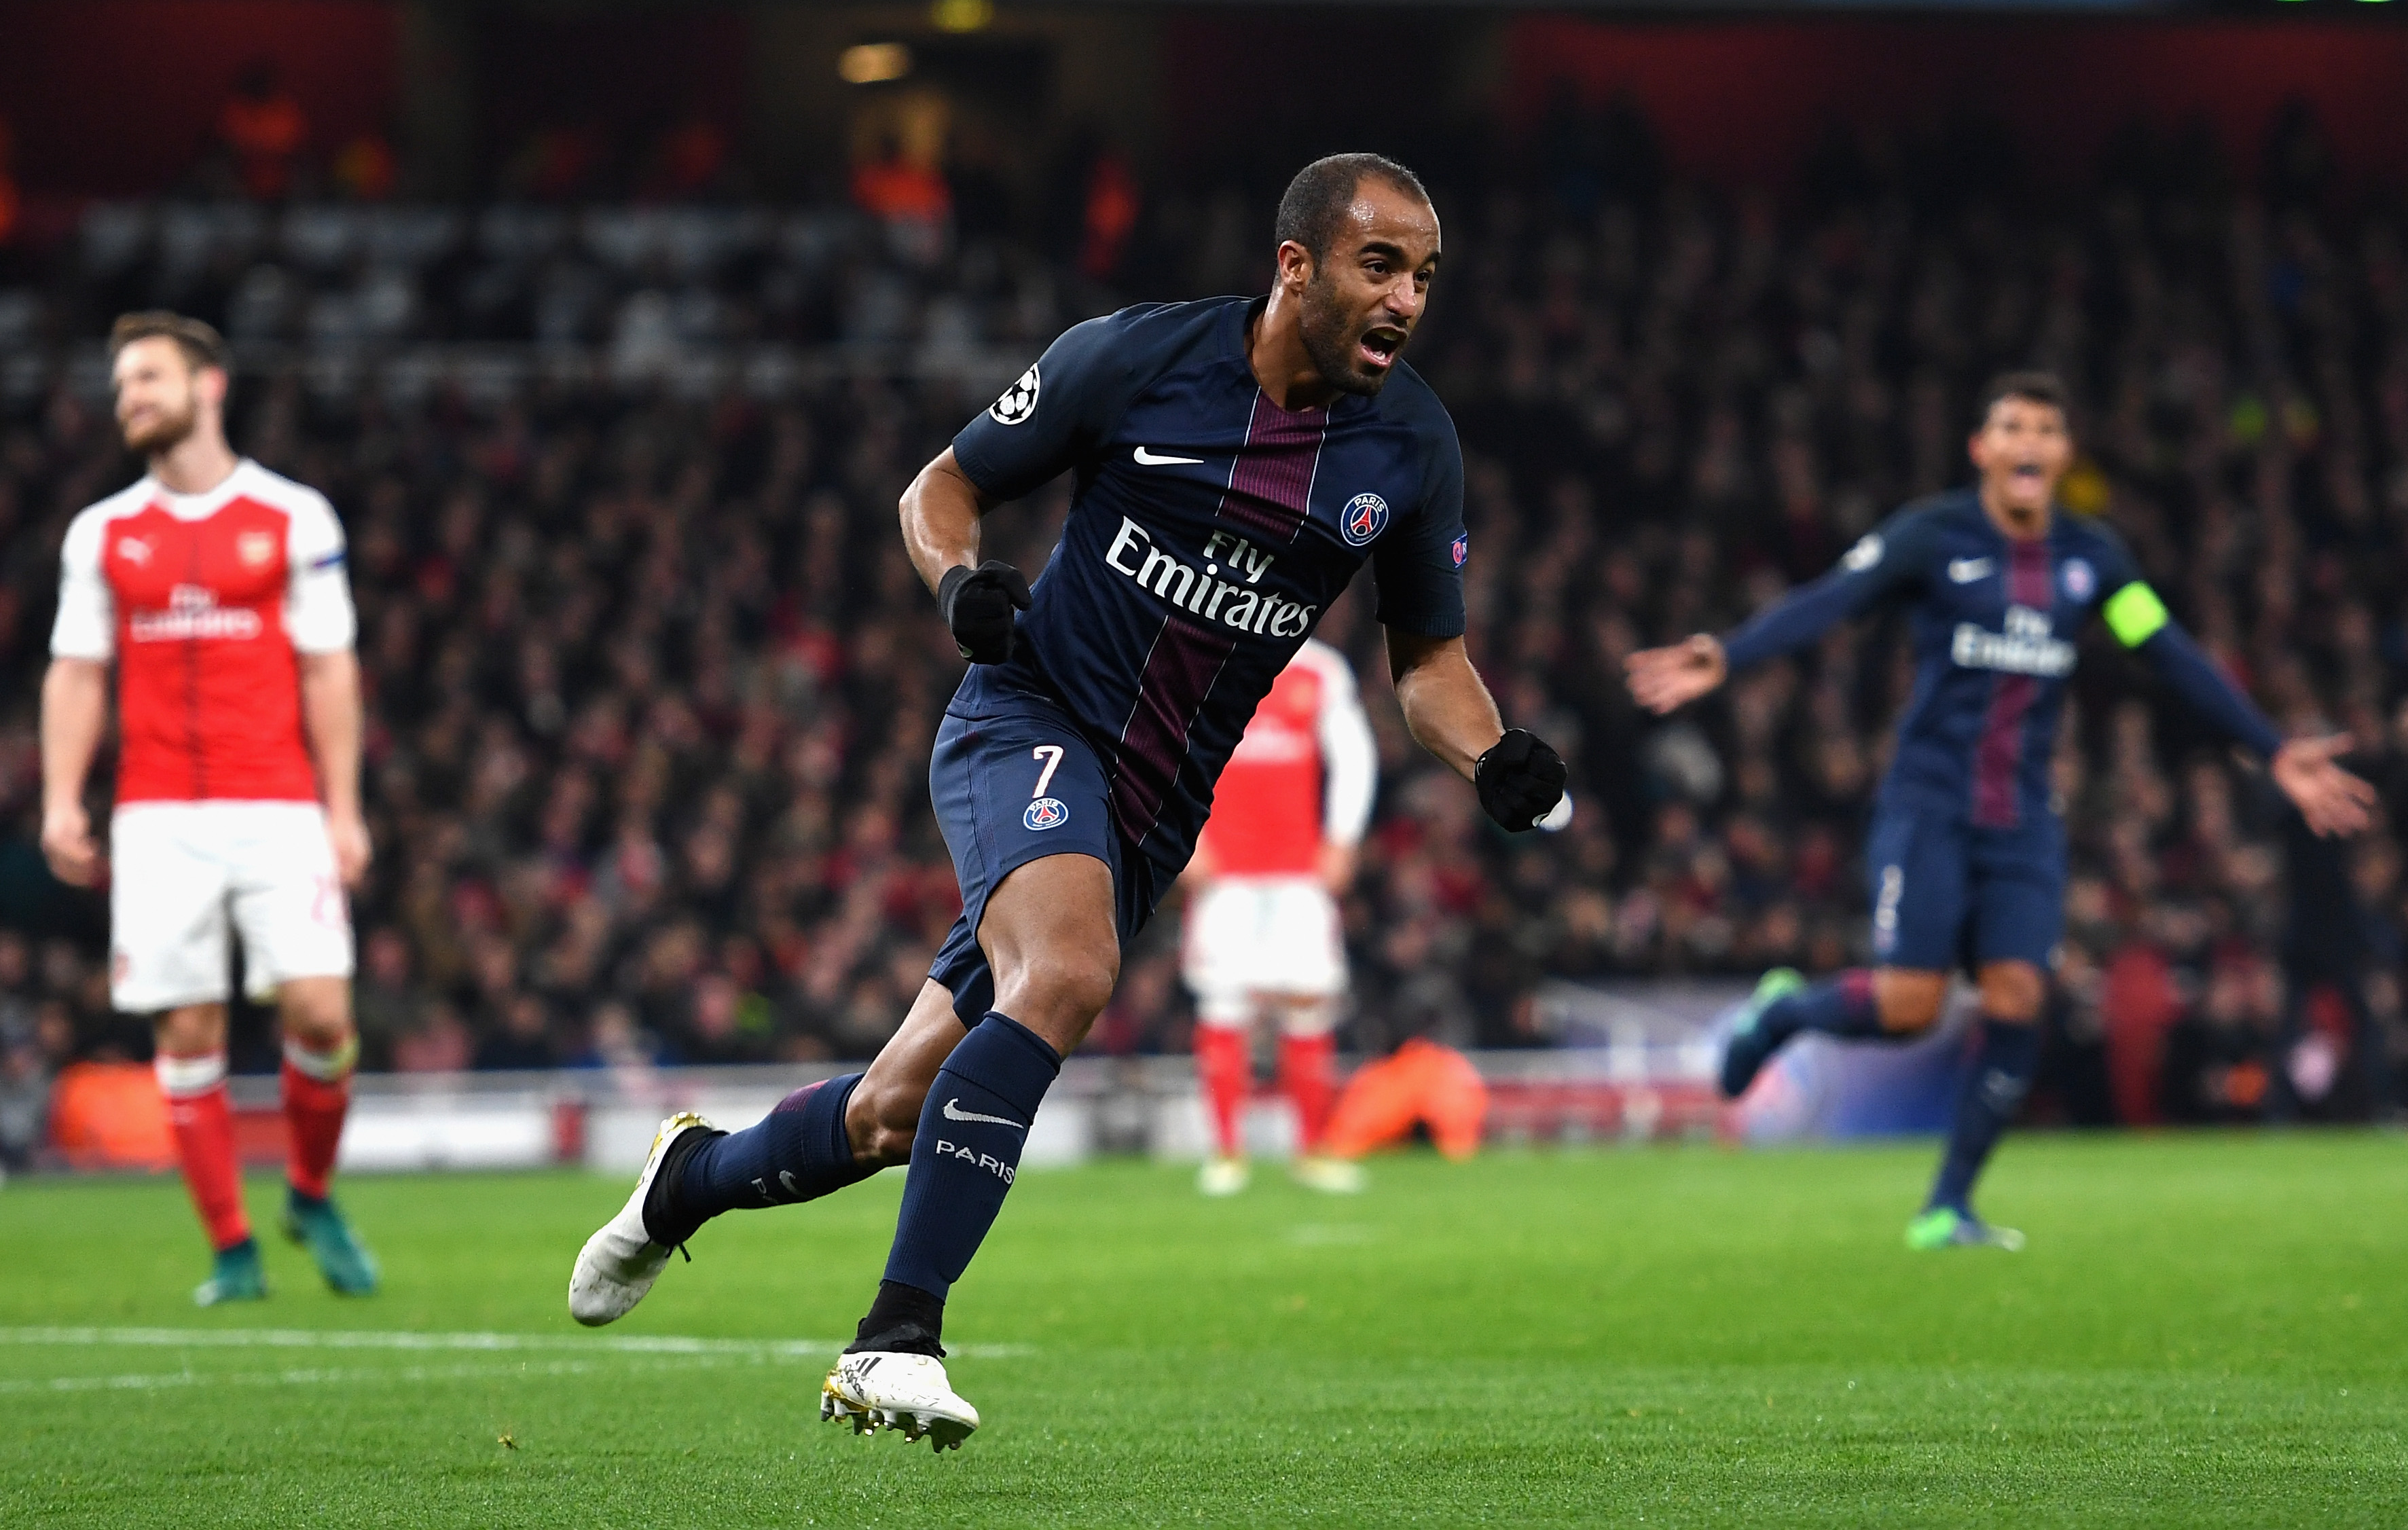 LONDON, ENGLAND - NOVEMBER 23:  Lucas of PSG celebrates scoring his sides second goal during the UEFA Champions League Group A match between Arsenal FC and Paris Saint-Germain at the Emirates Stadium on November 23, 2016 in London, England.  (Photo by Shaun Botterill/Getty Images)